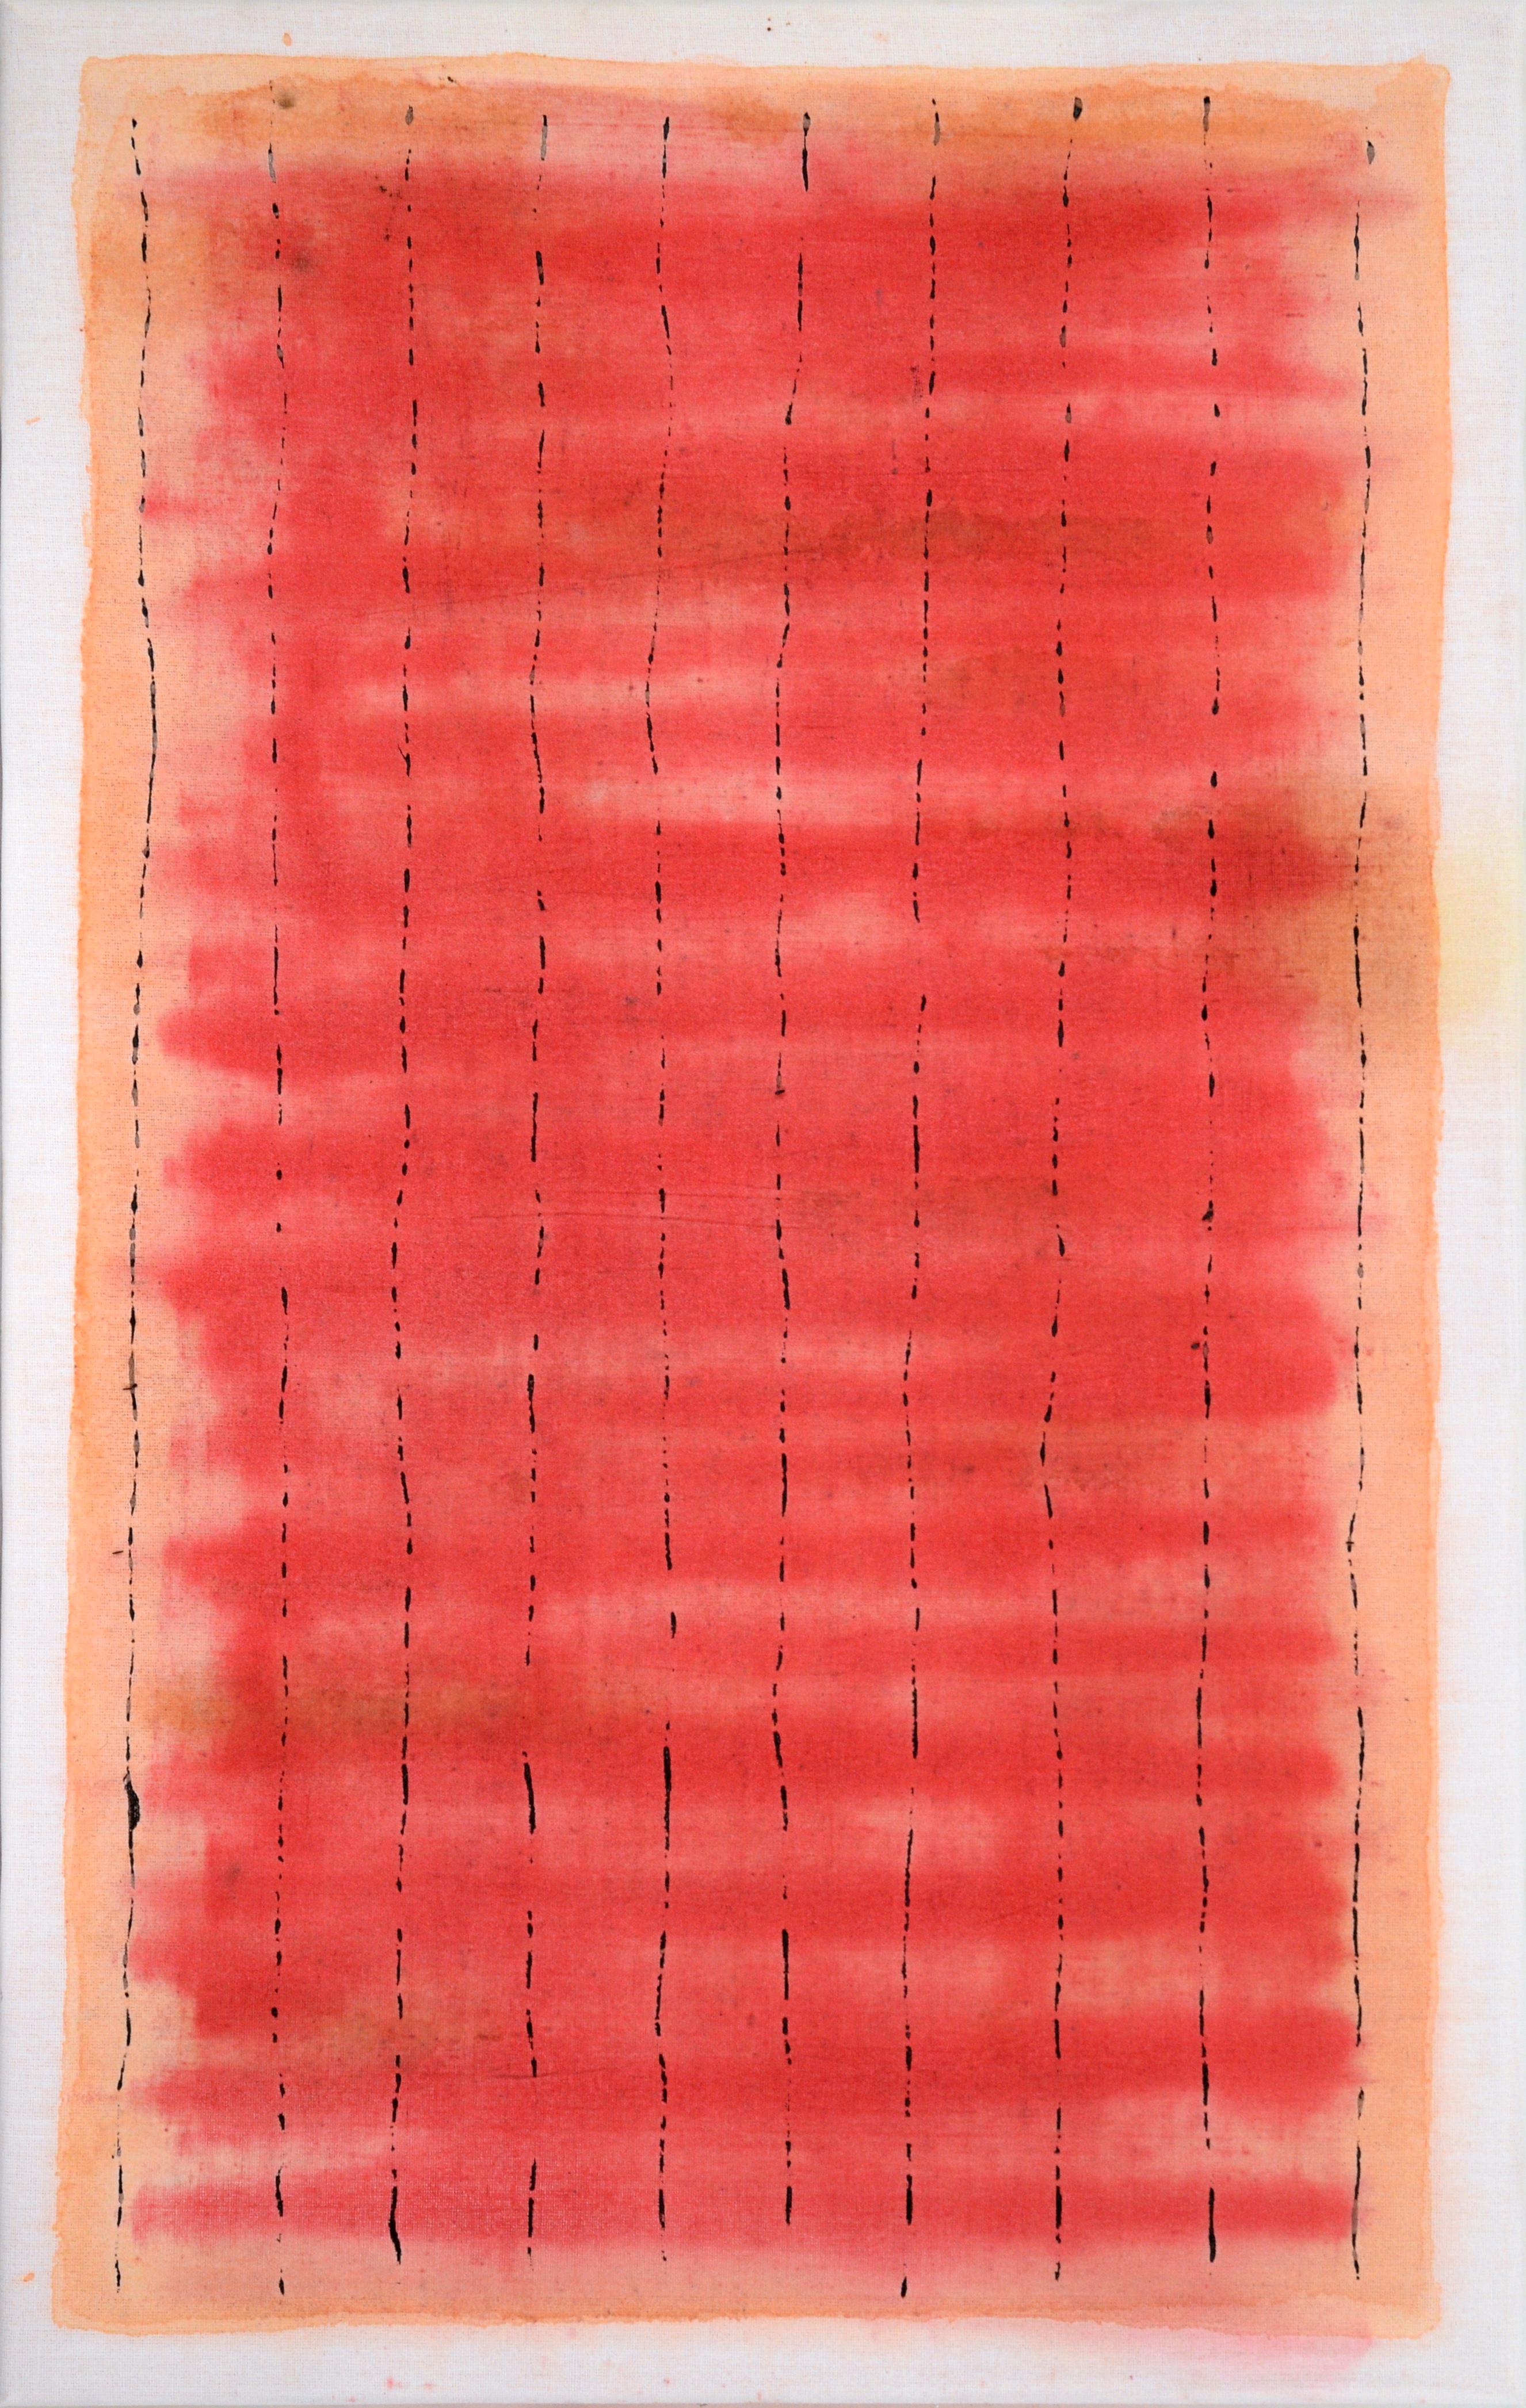 Black Lines Across a Red Field - Abstract Composition on Starched Linen - Painting by D Whalen